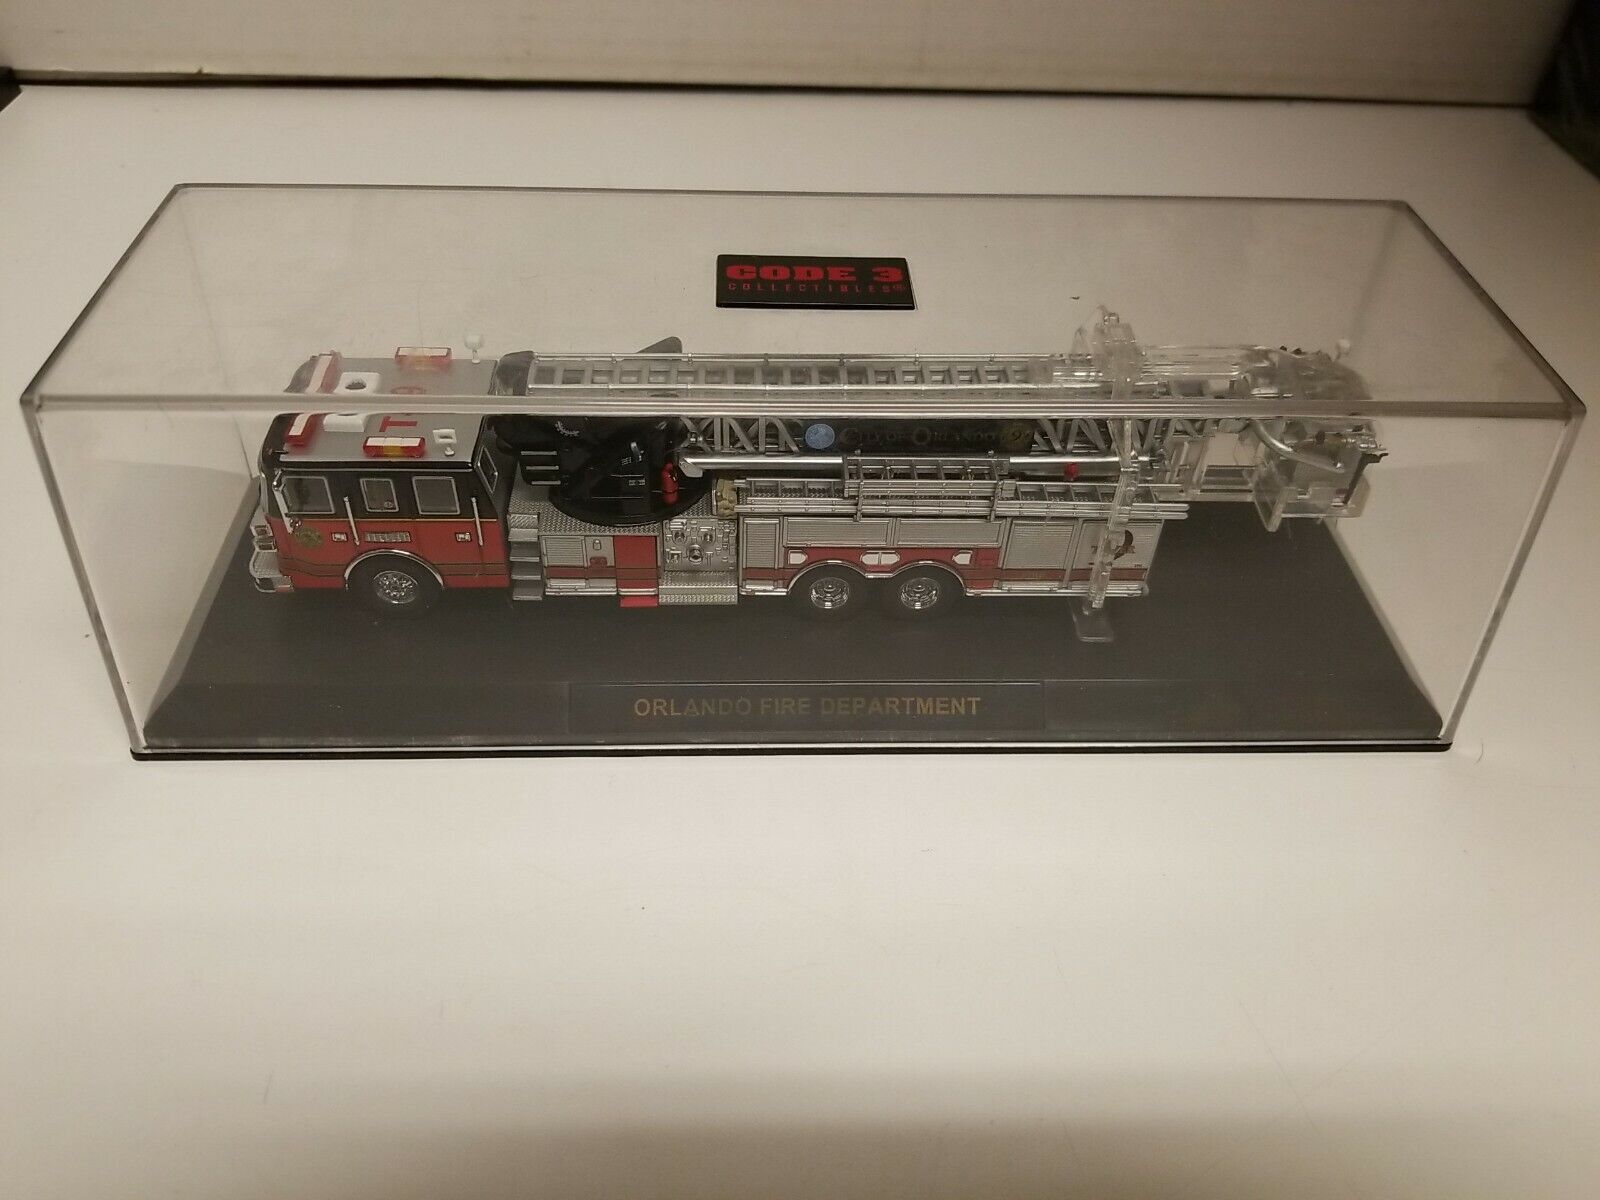 Code 3 Collectibles Orlando Fire Department Tower Ladder T-9 Die Cast